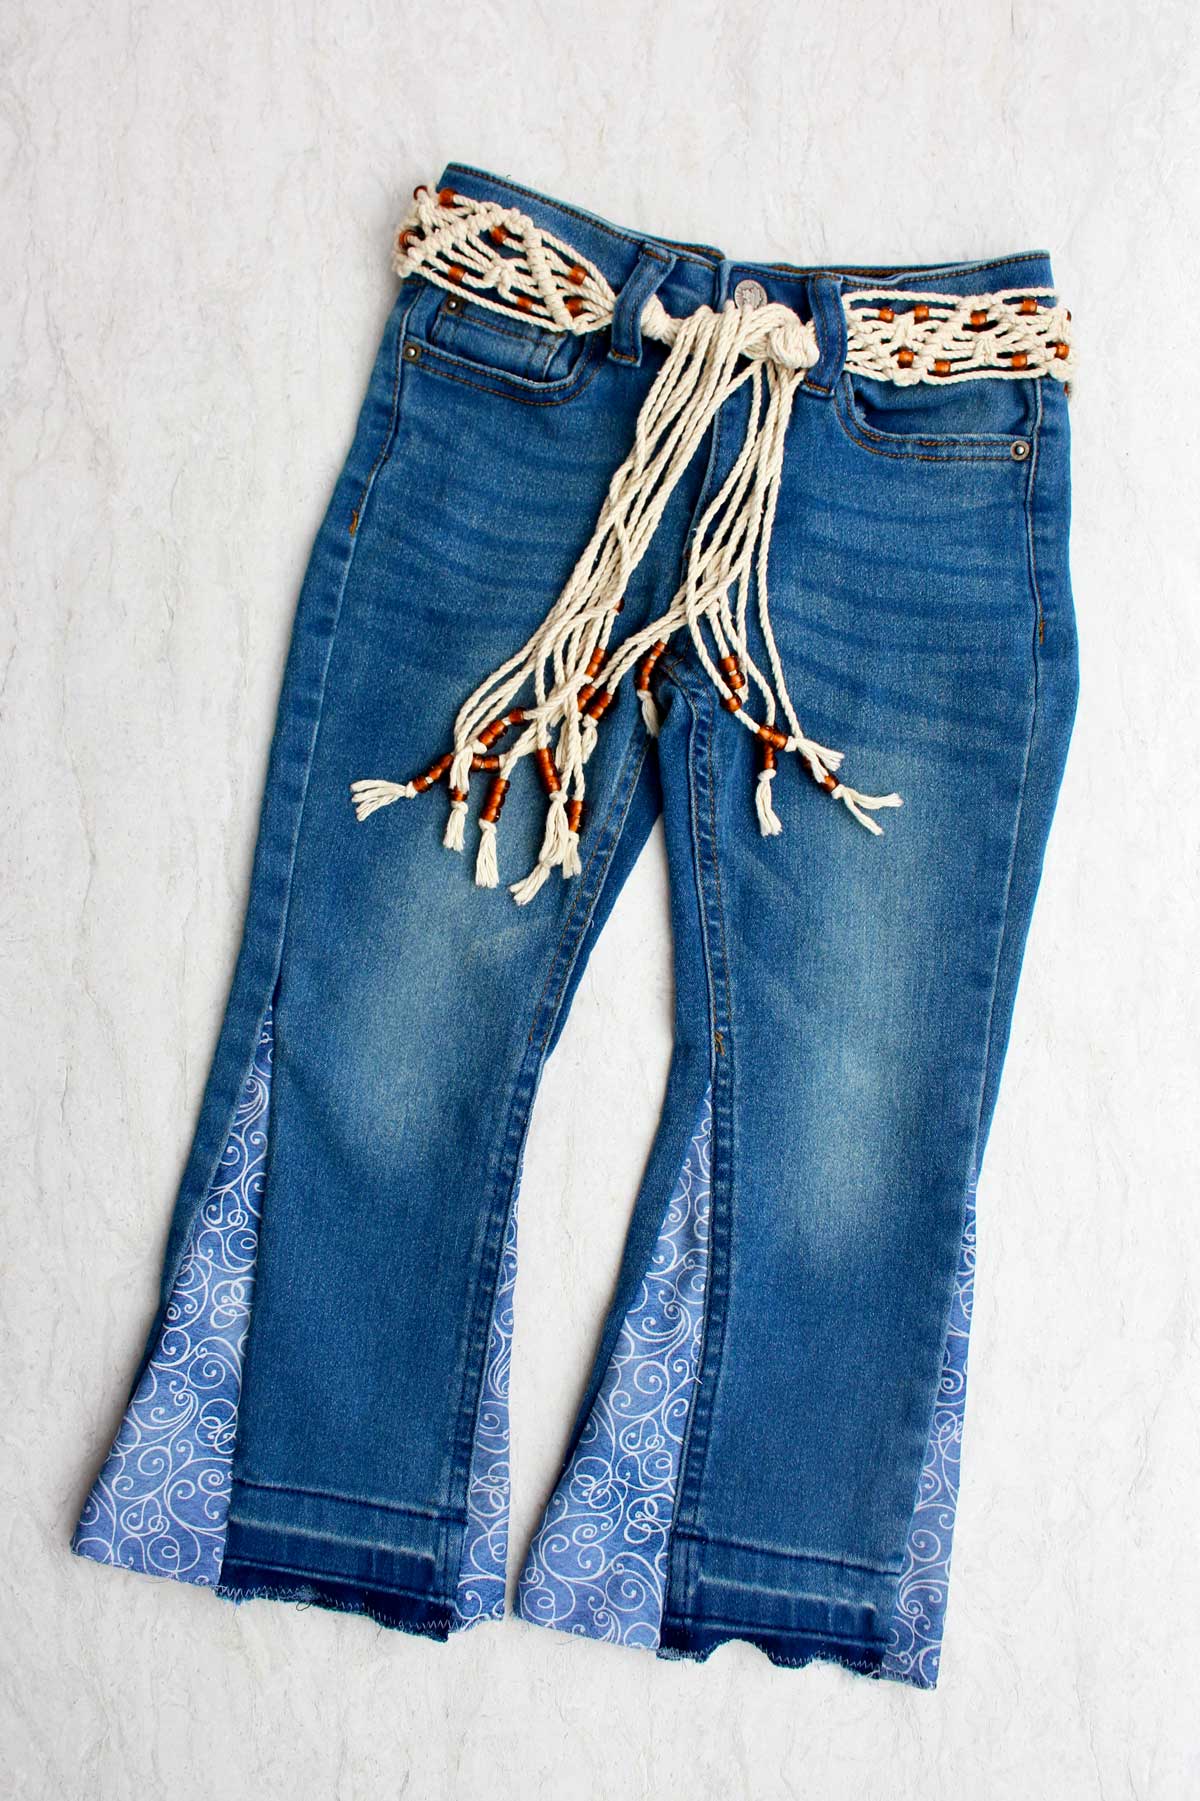 A pair of child's jeans made into bell bottoms with blue swirled fabric, tied with a macrame belt.